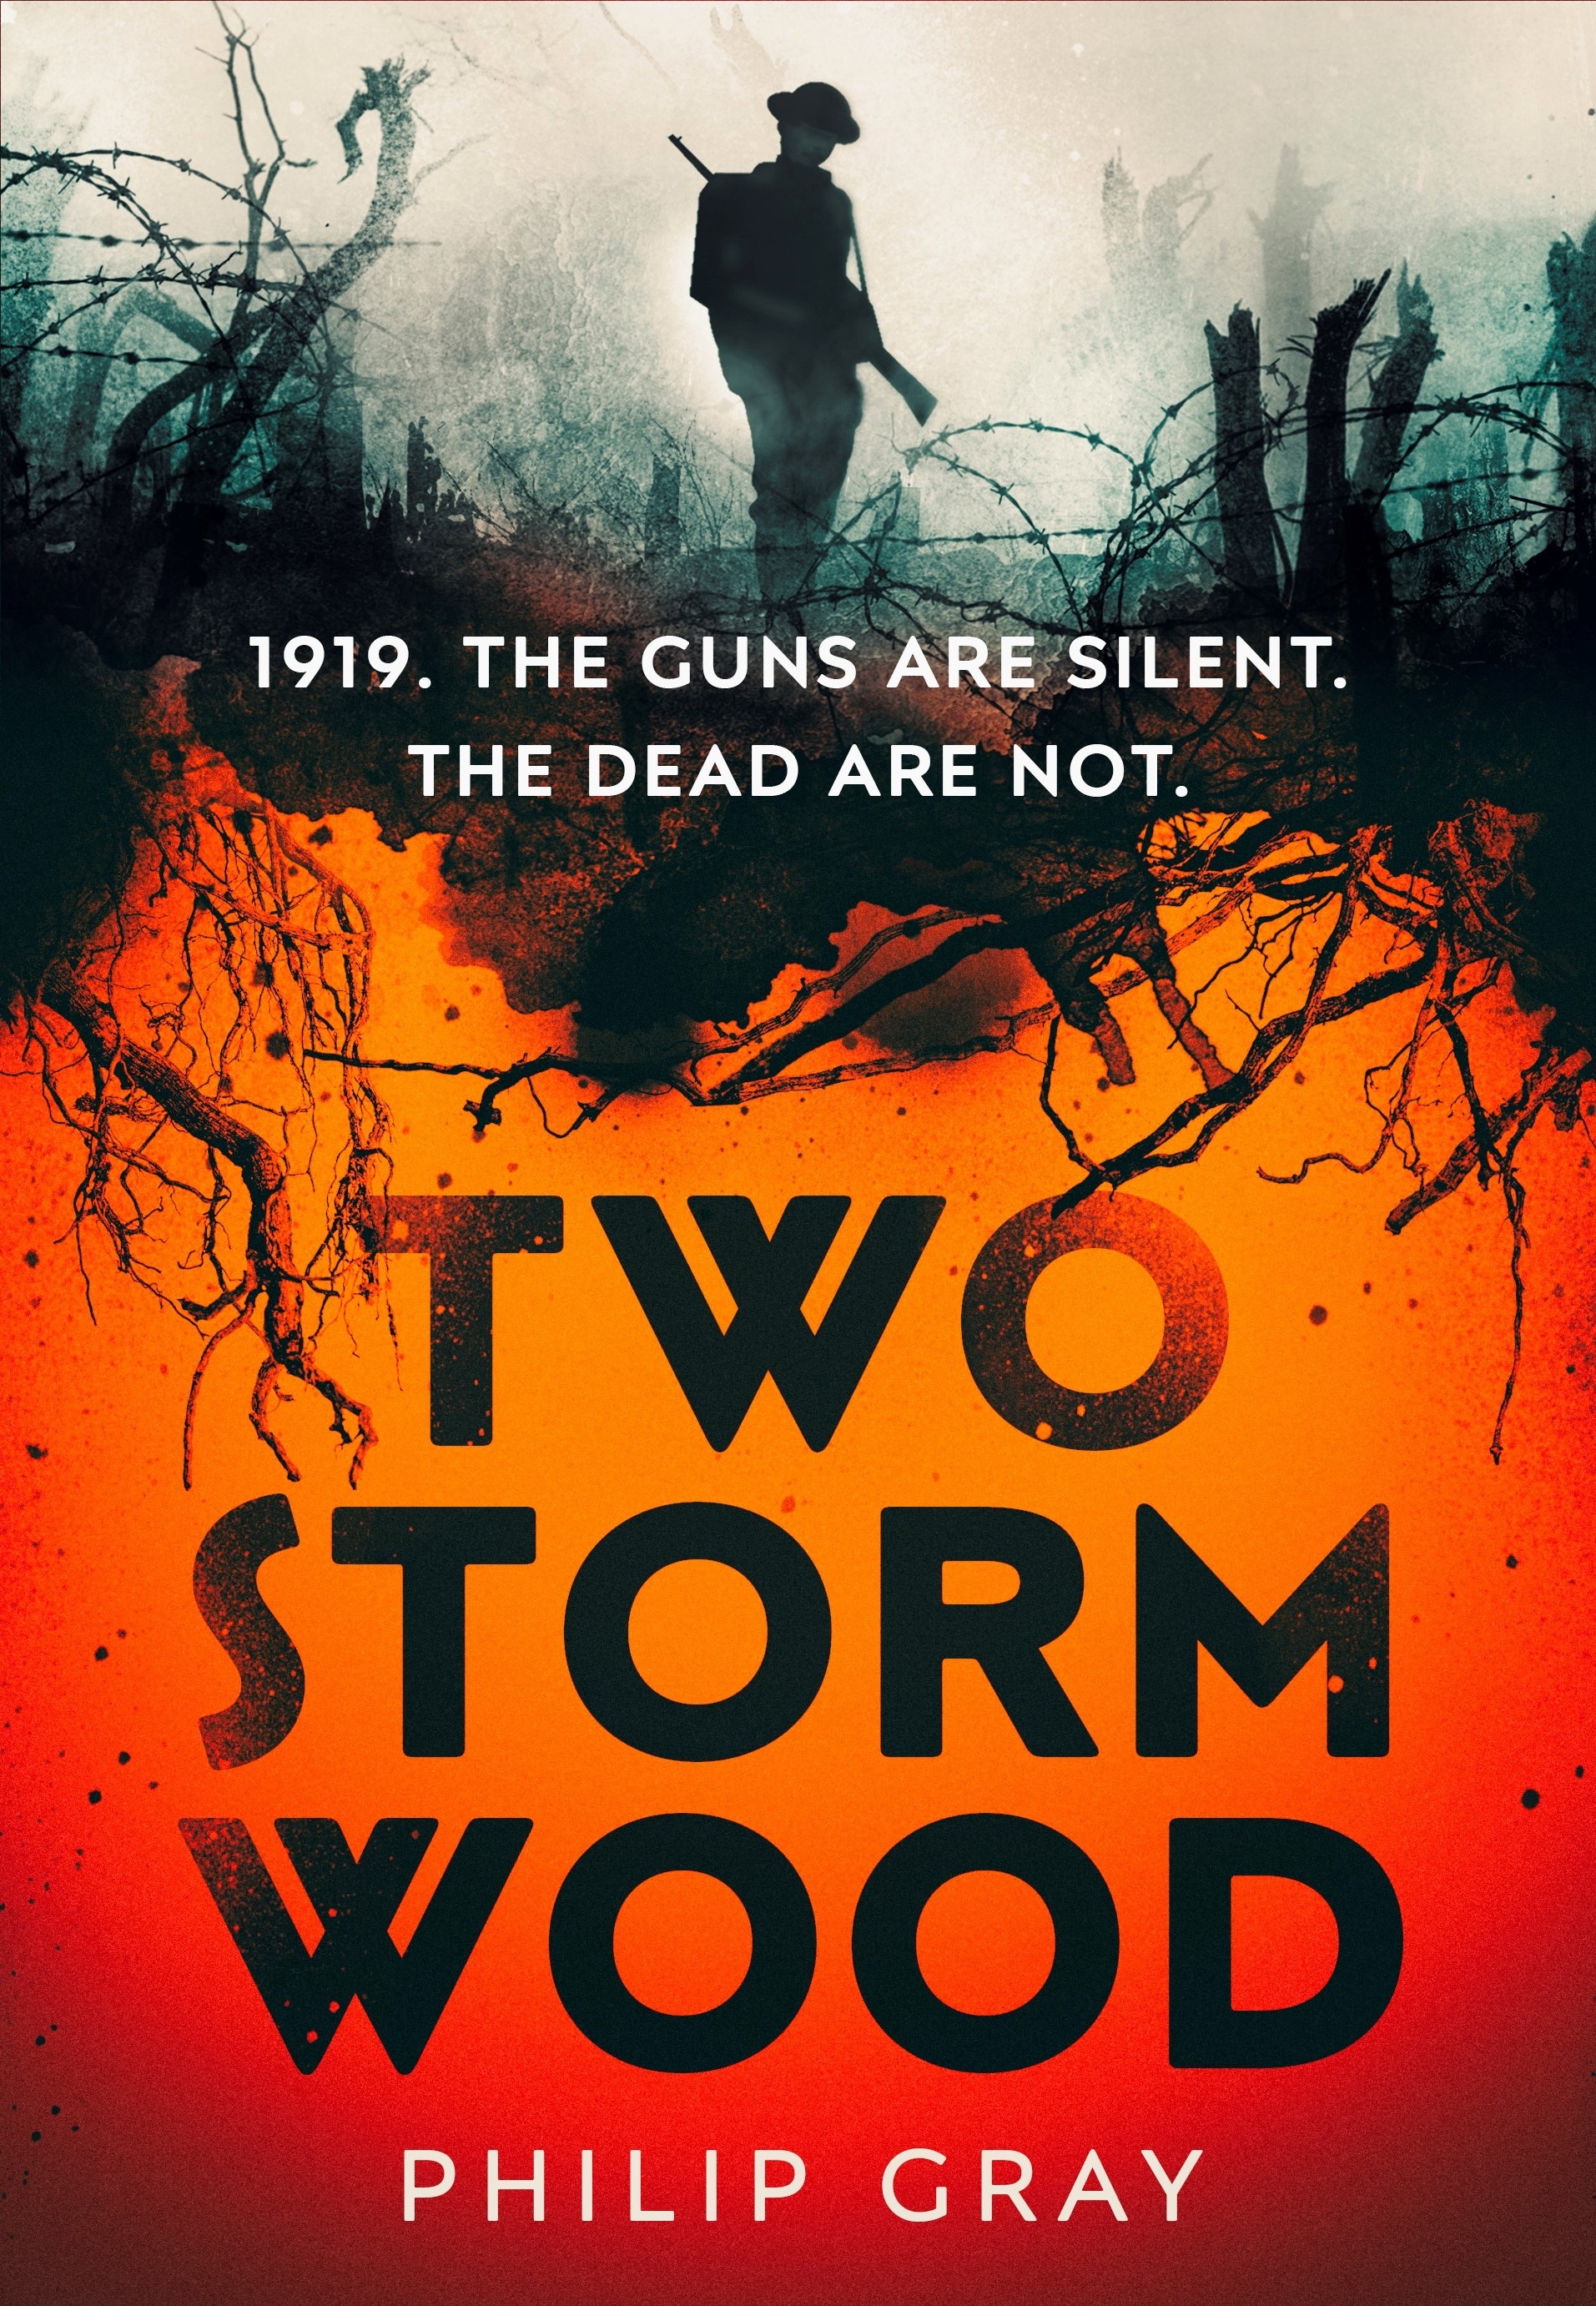 Book “Two Storm Wood” by Philip Gray — January 13, 2022